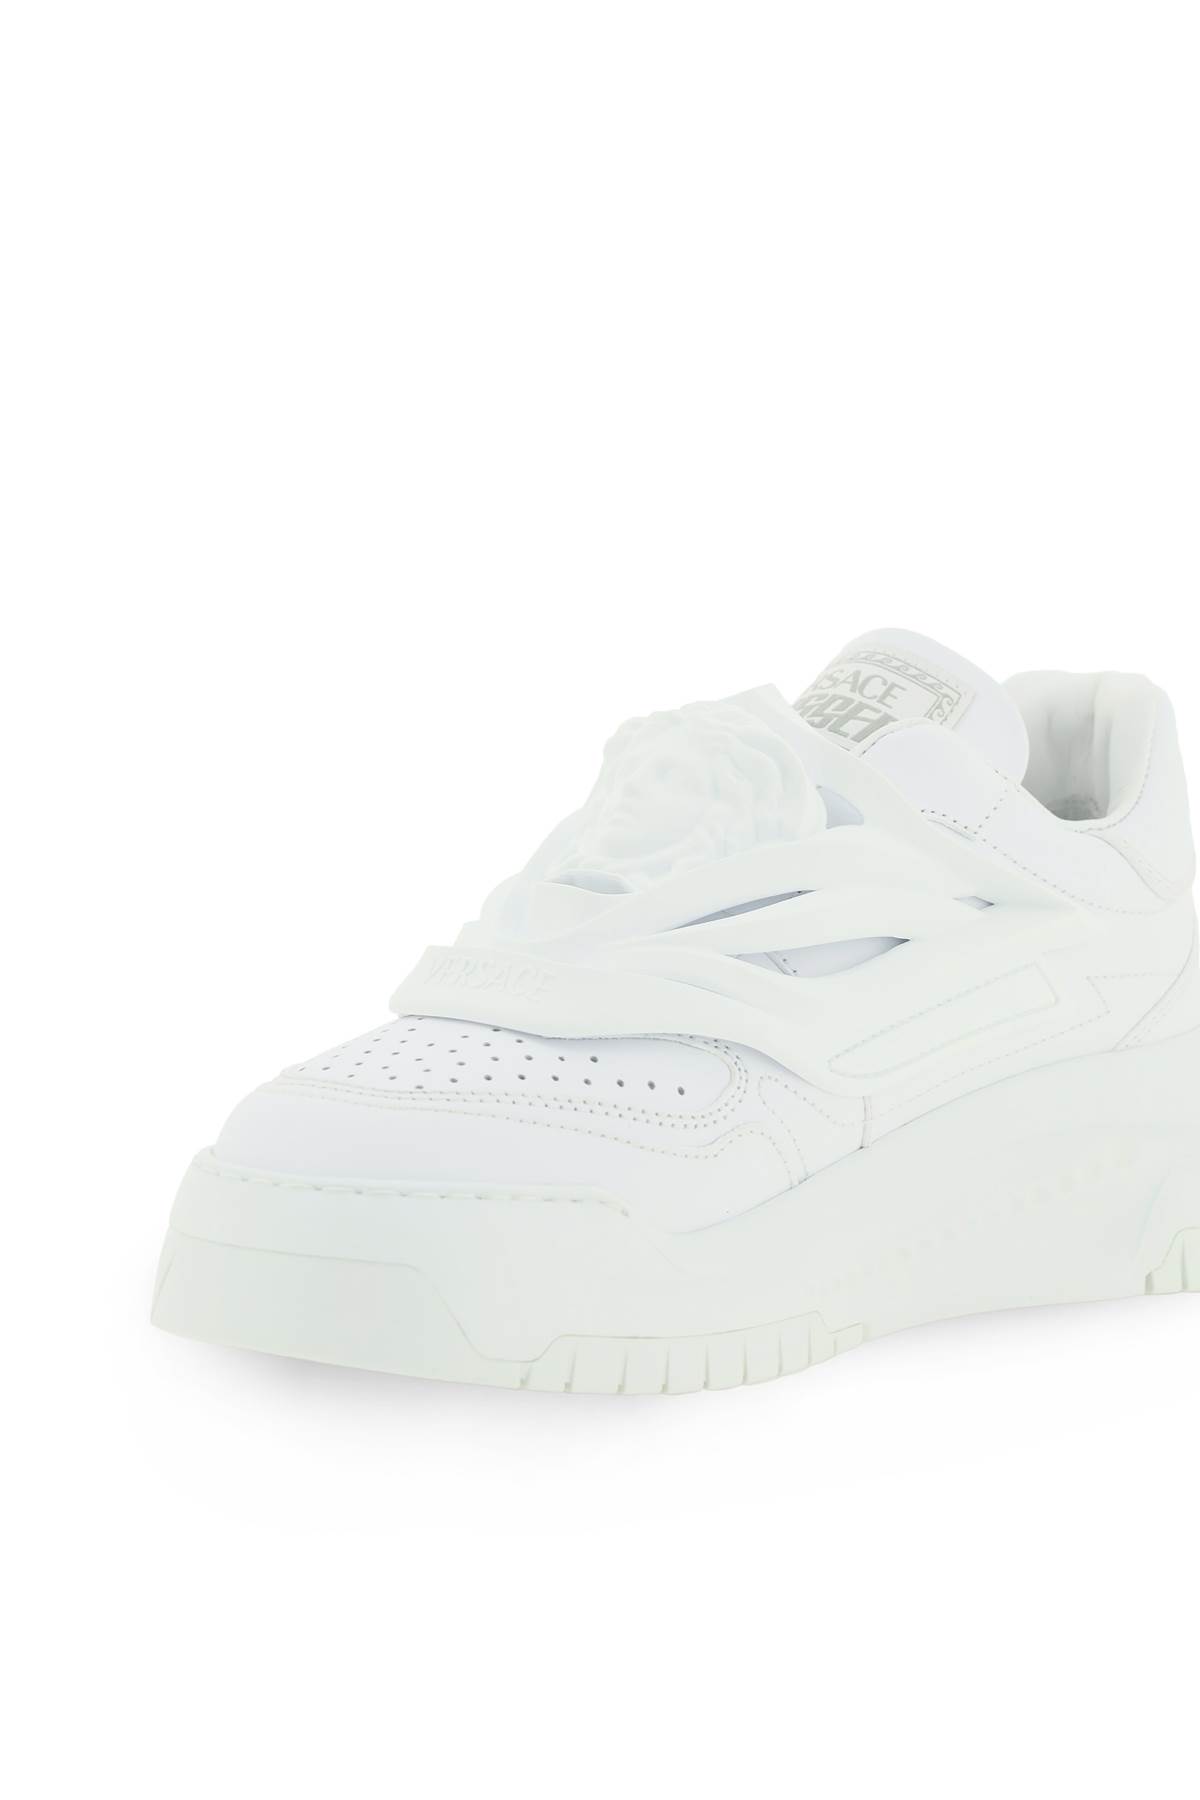 Shop Versace Odissea Sneakers In White (white)